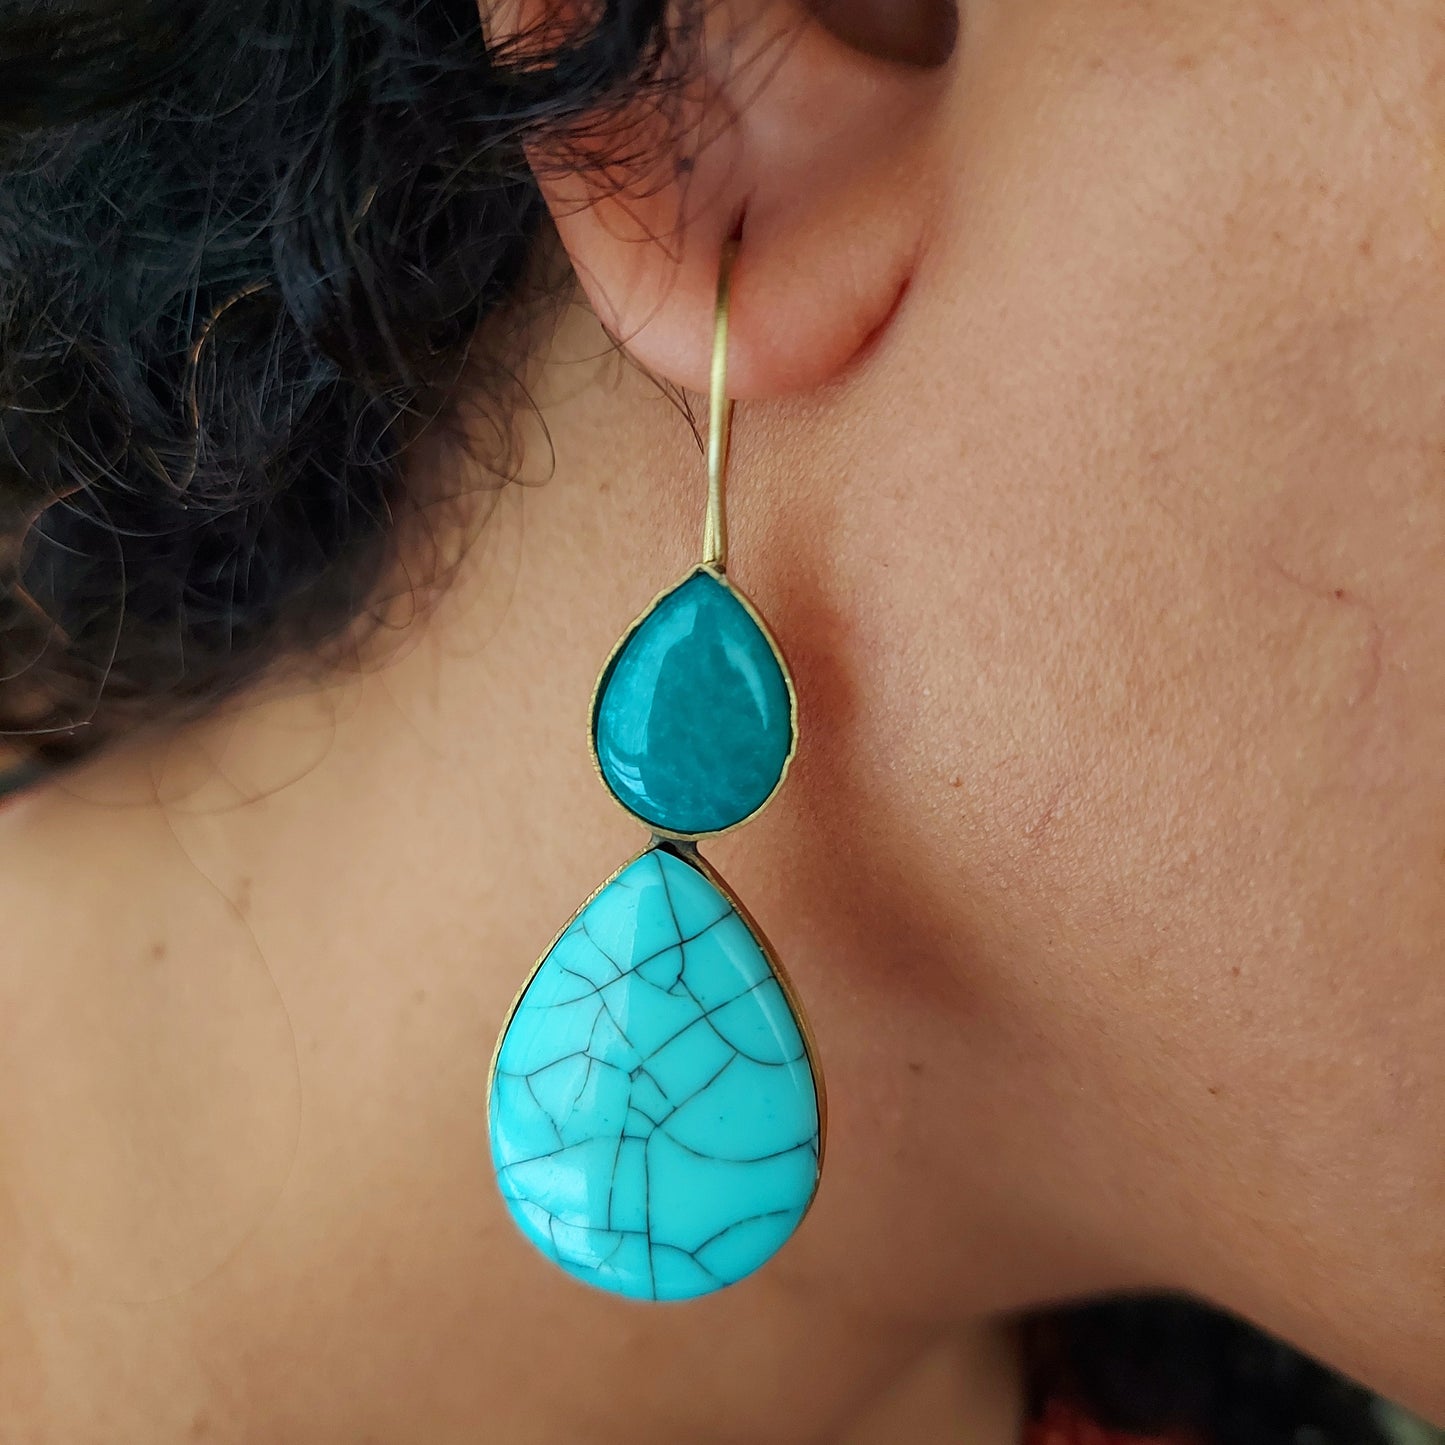 Gold Toned Turquoise Hooked Earrings